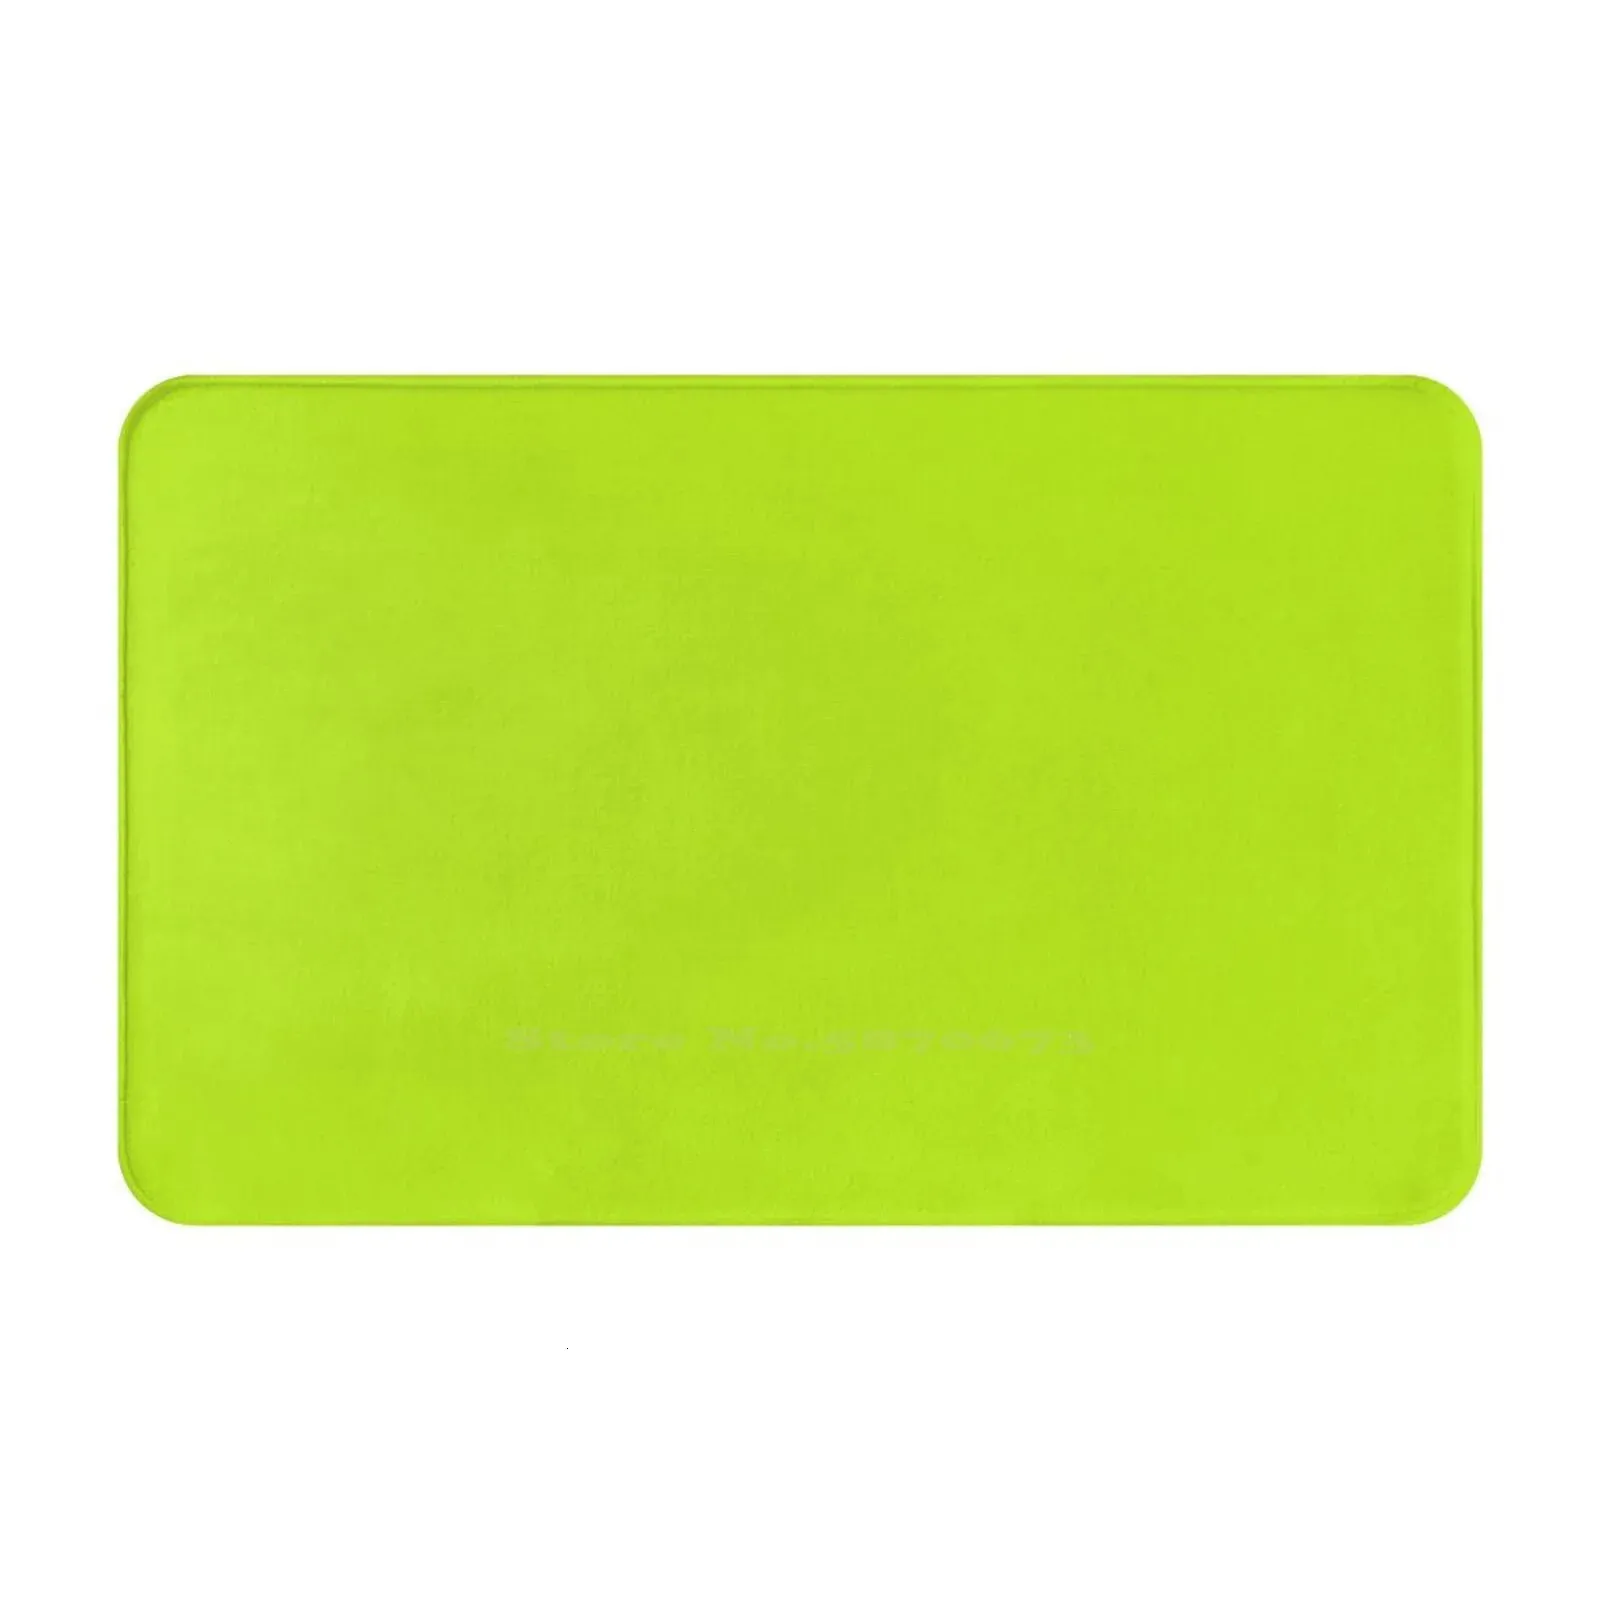 Lime Green Door Mat Foot Pad Home Rug Lime Green Forest Tree Wedding Citrus I Do Favor Bright 240111